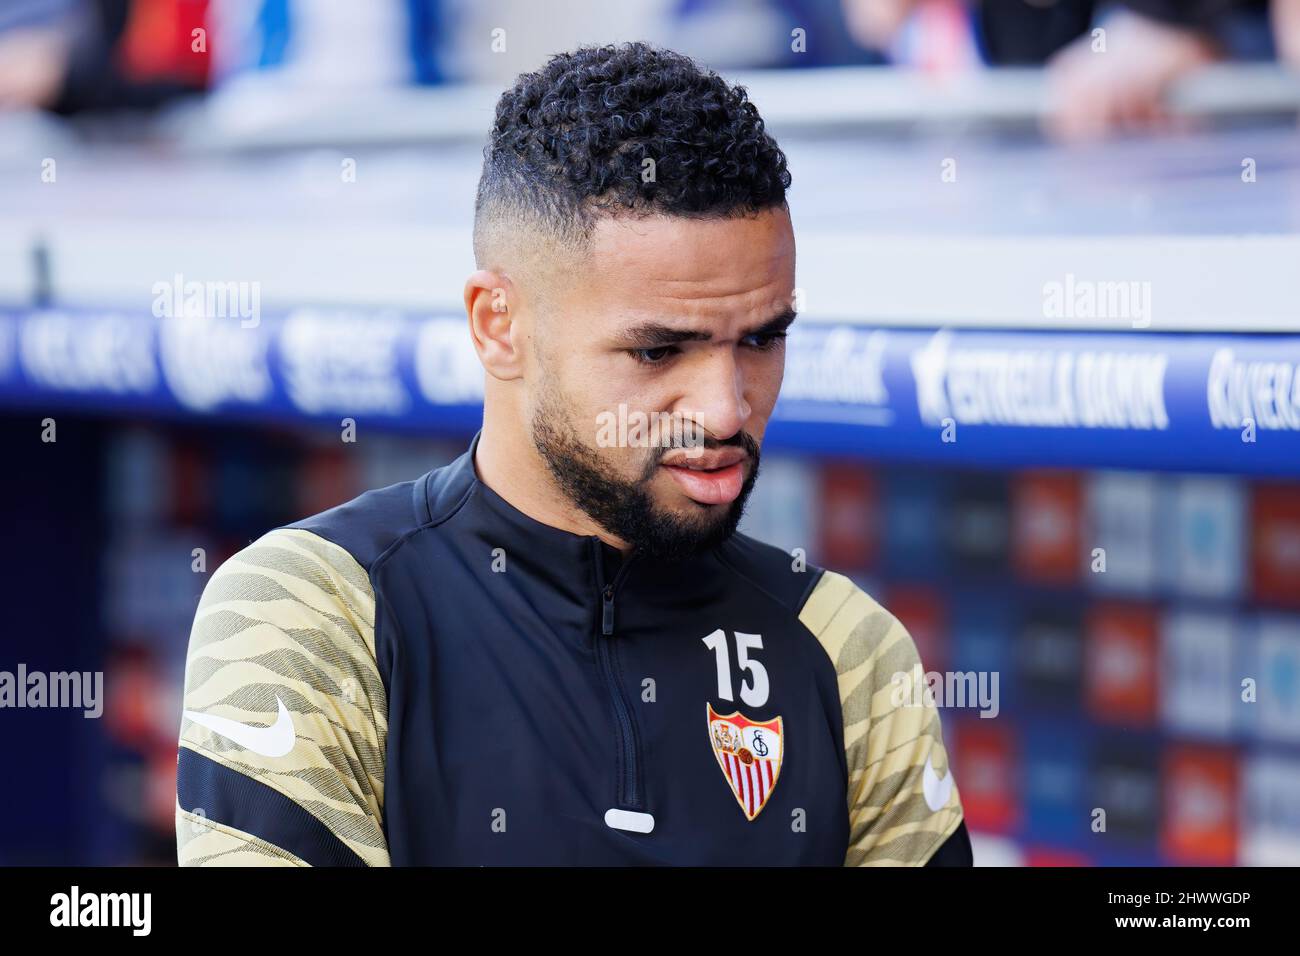 BARCELONA - FEB 20: Youssef En-Nesyri sits on the bench during the La Liga match between RCD Espanyol and Sevilla FC at the RCDE Stadium on February 2 Stock Photo